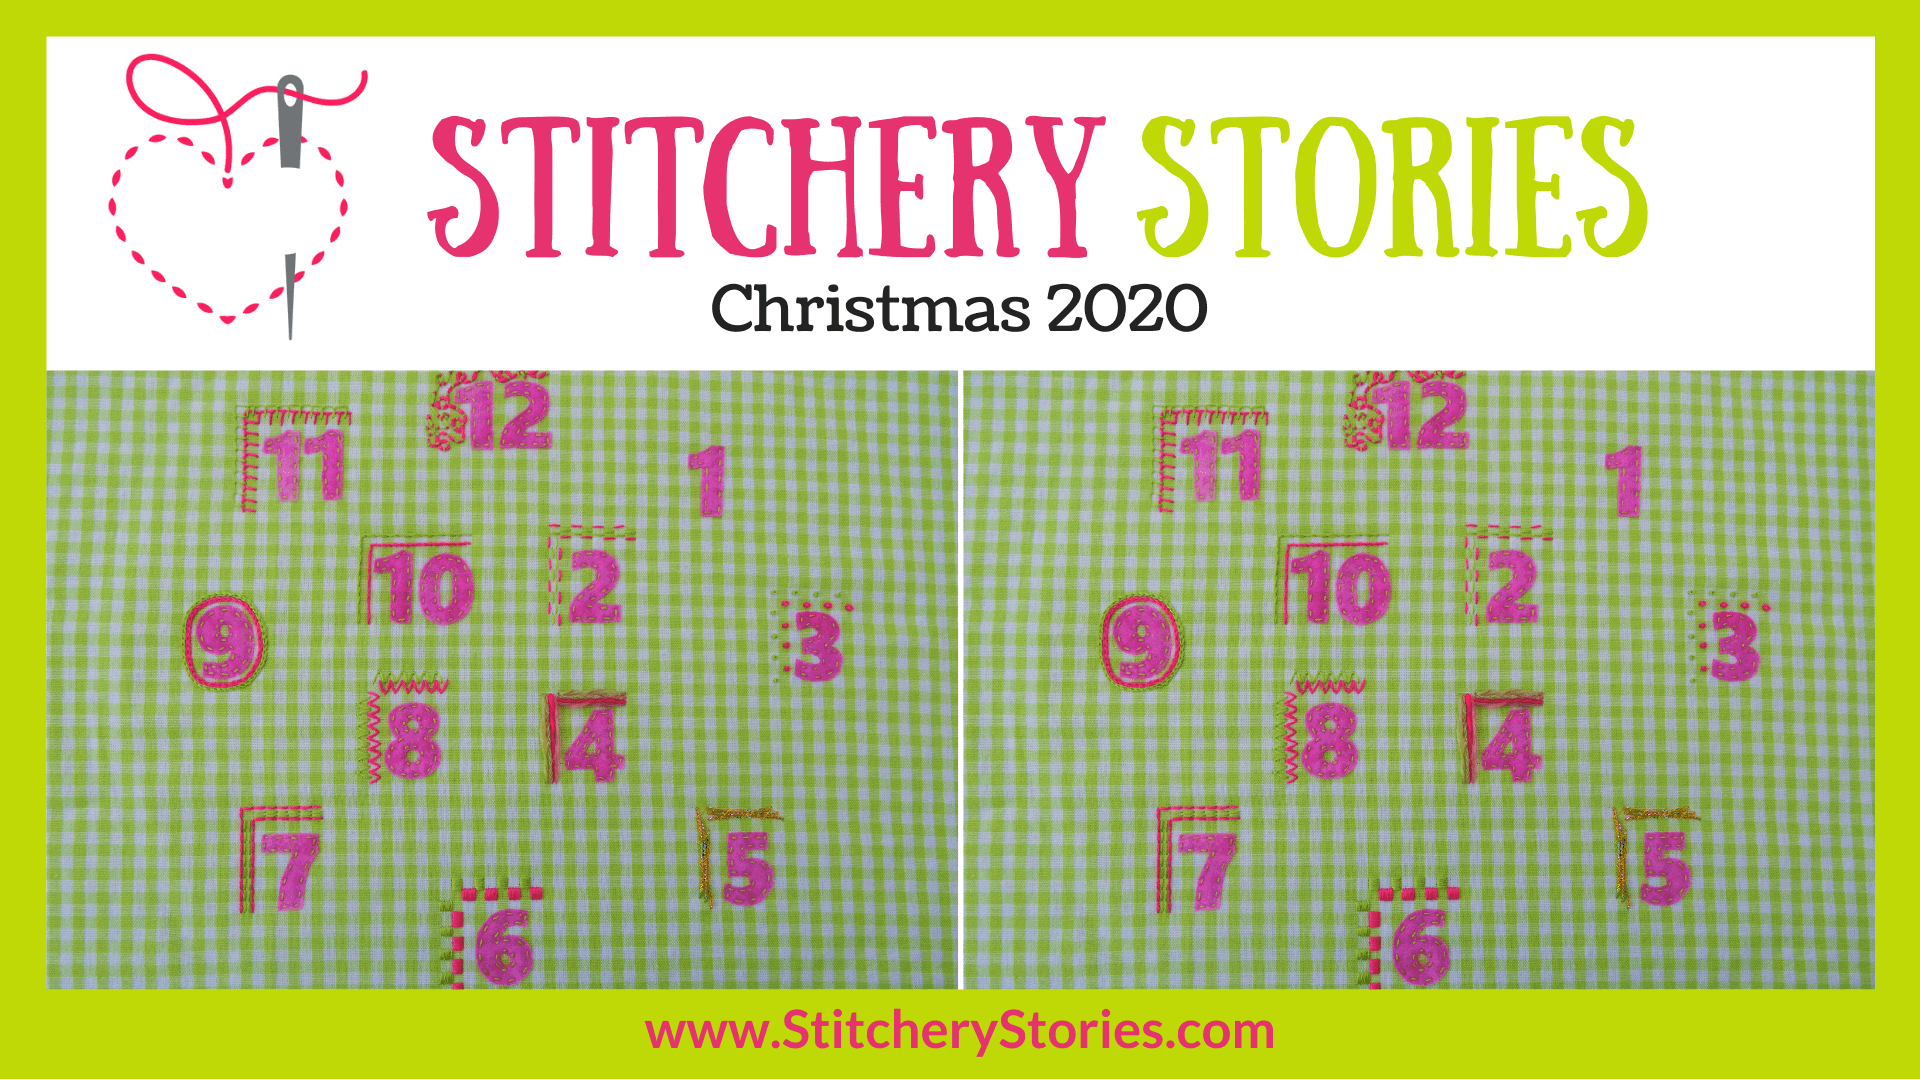 Christmas 2020 Stitchery Stories embroidery podcast Wide Art